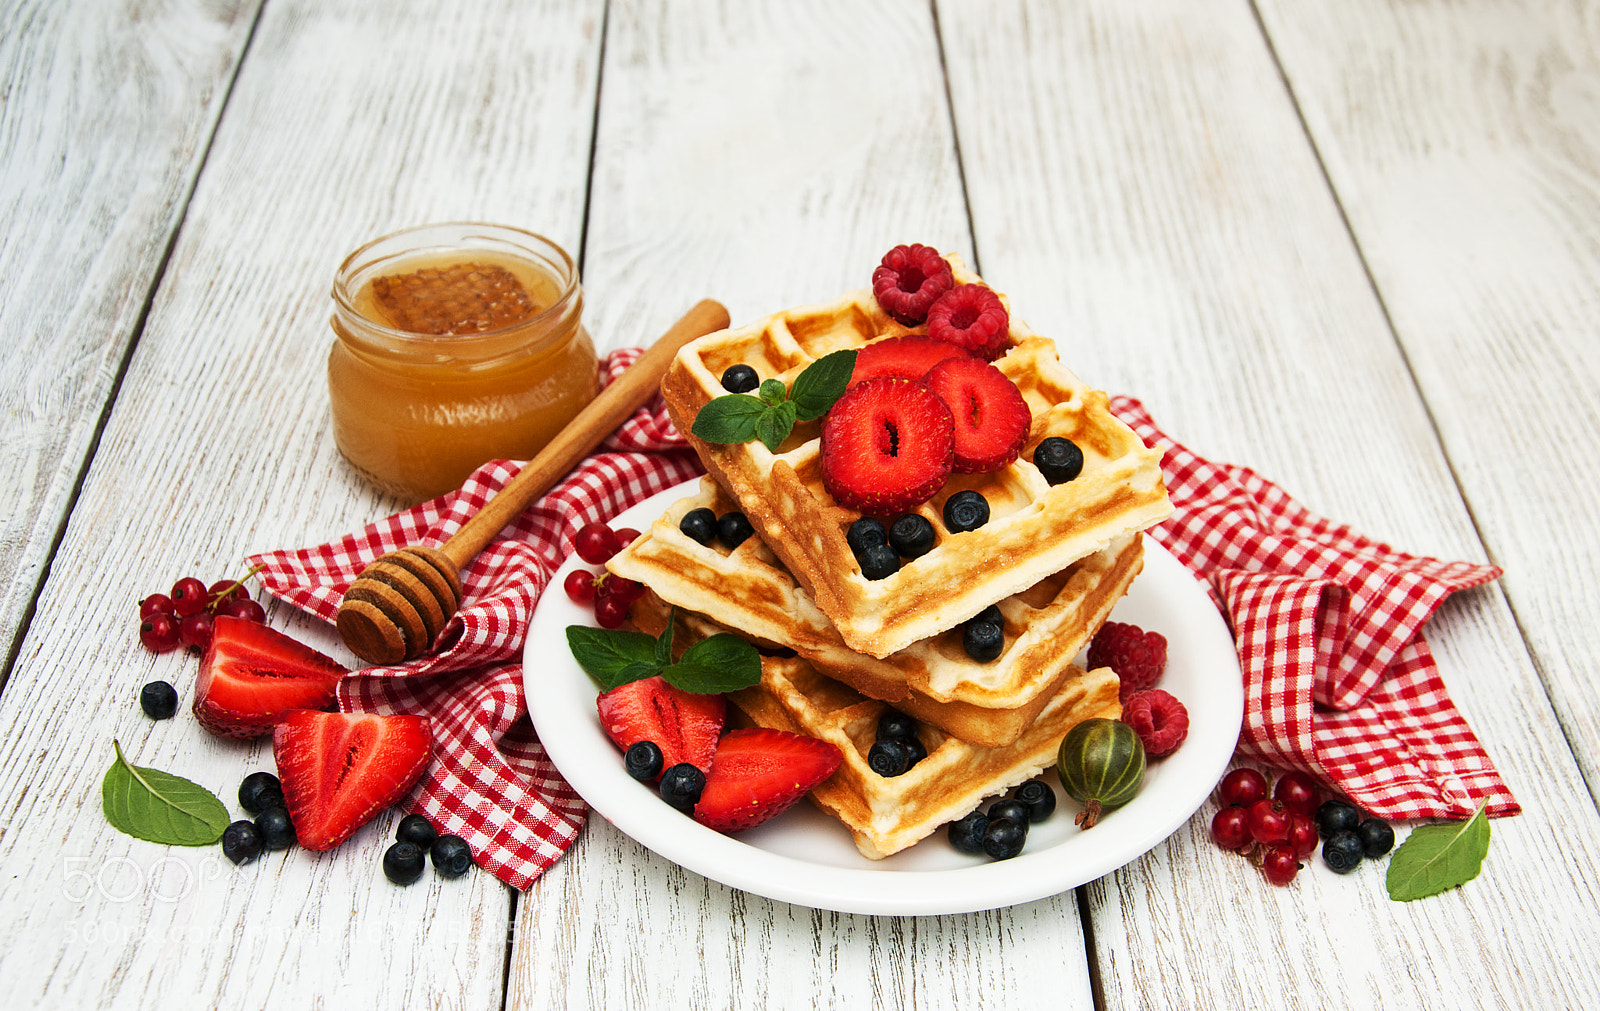 Nikon D90 sample photo. Waffles with fresh berries photography